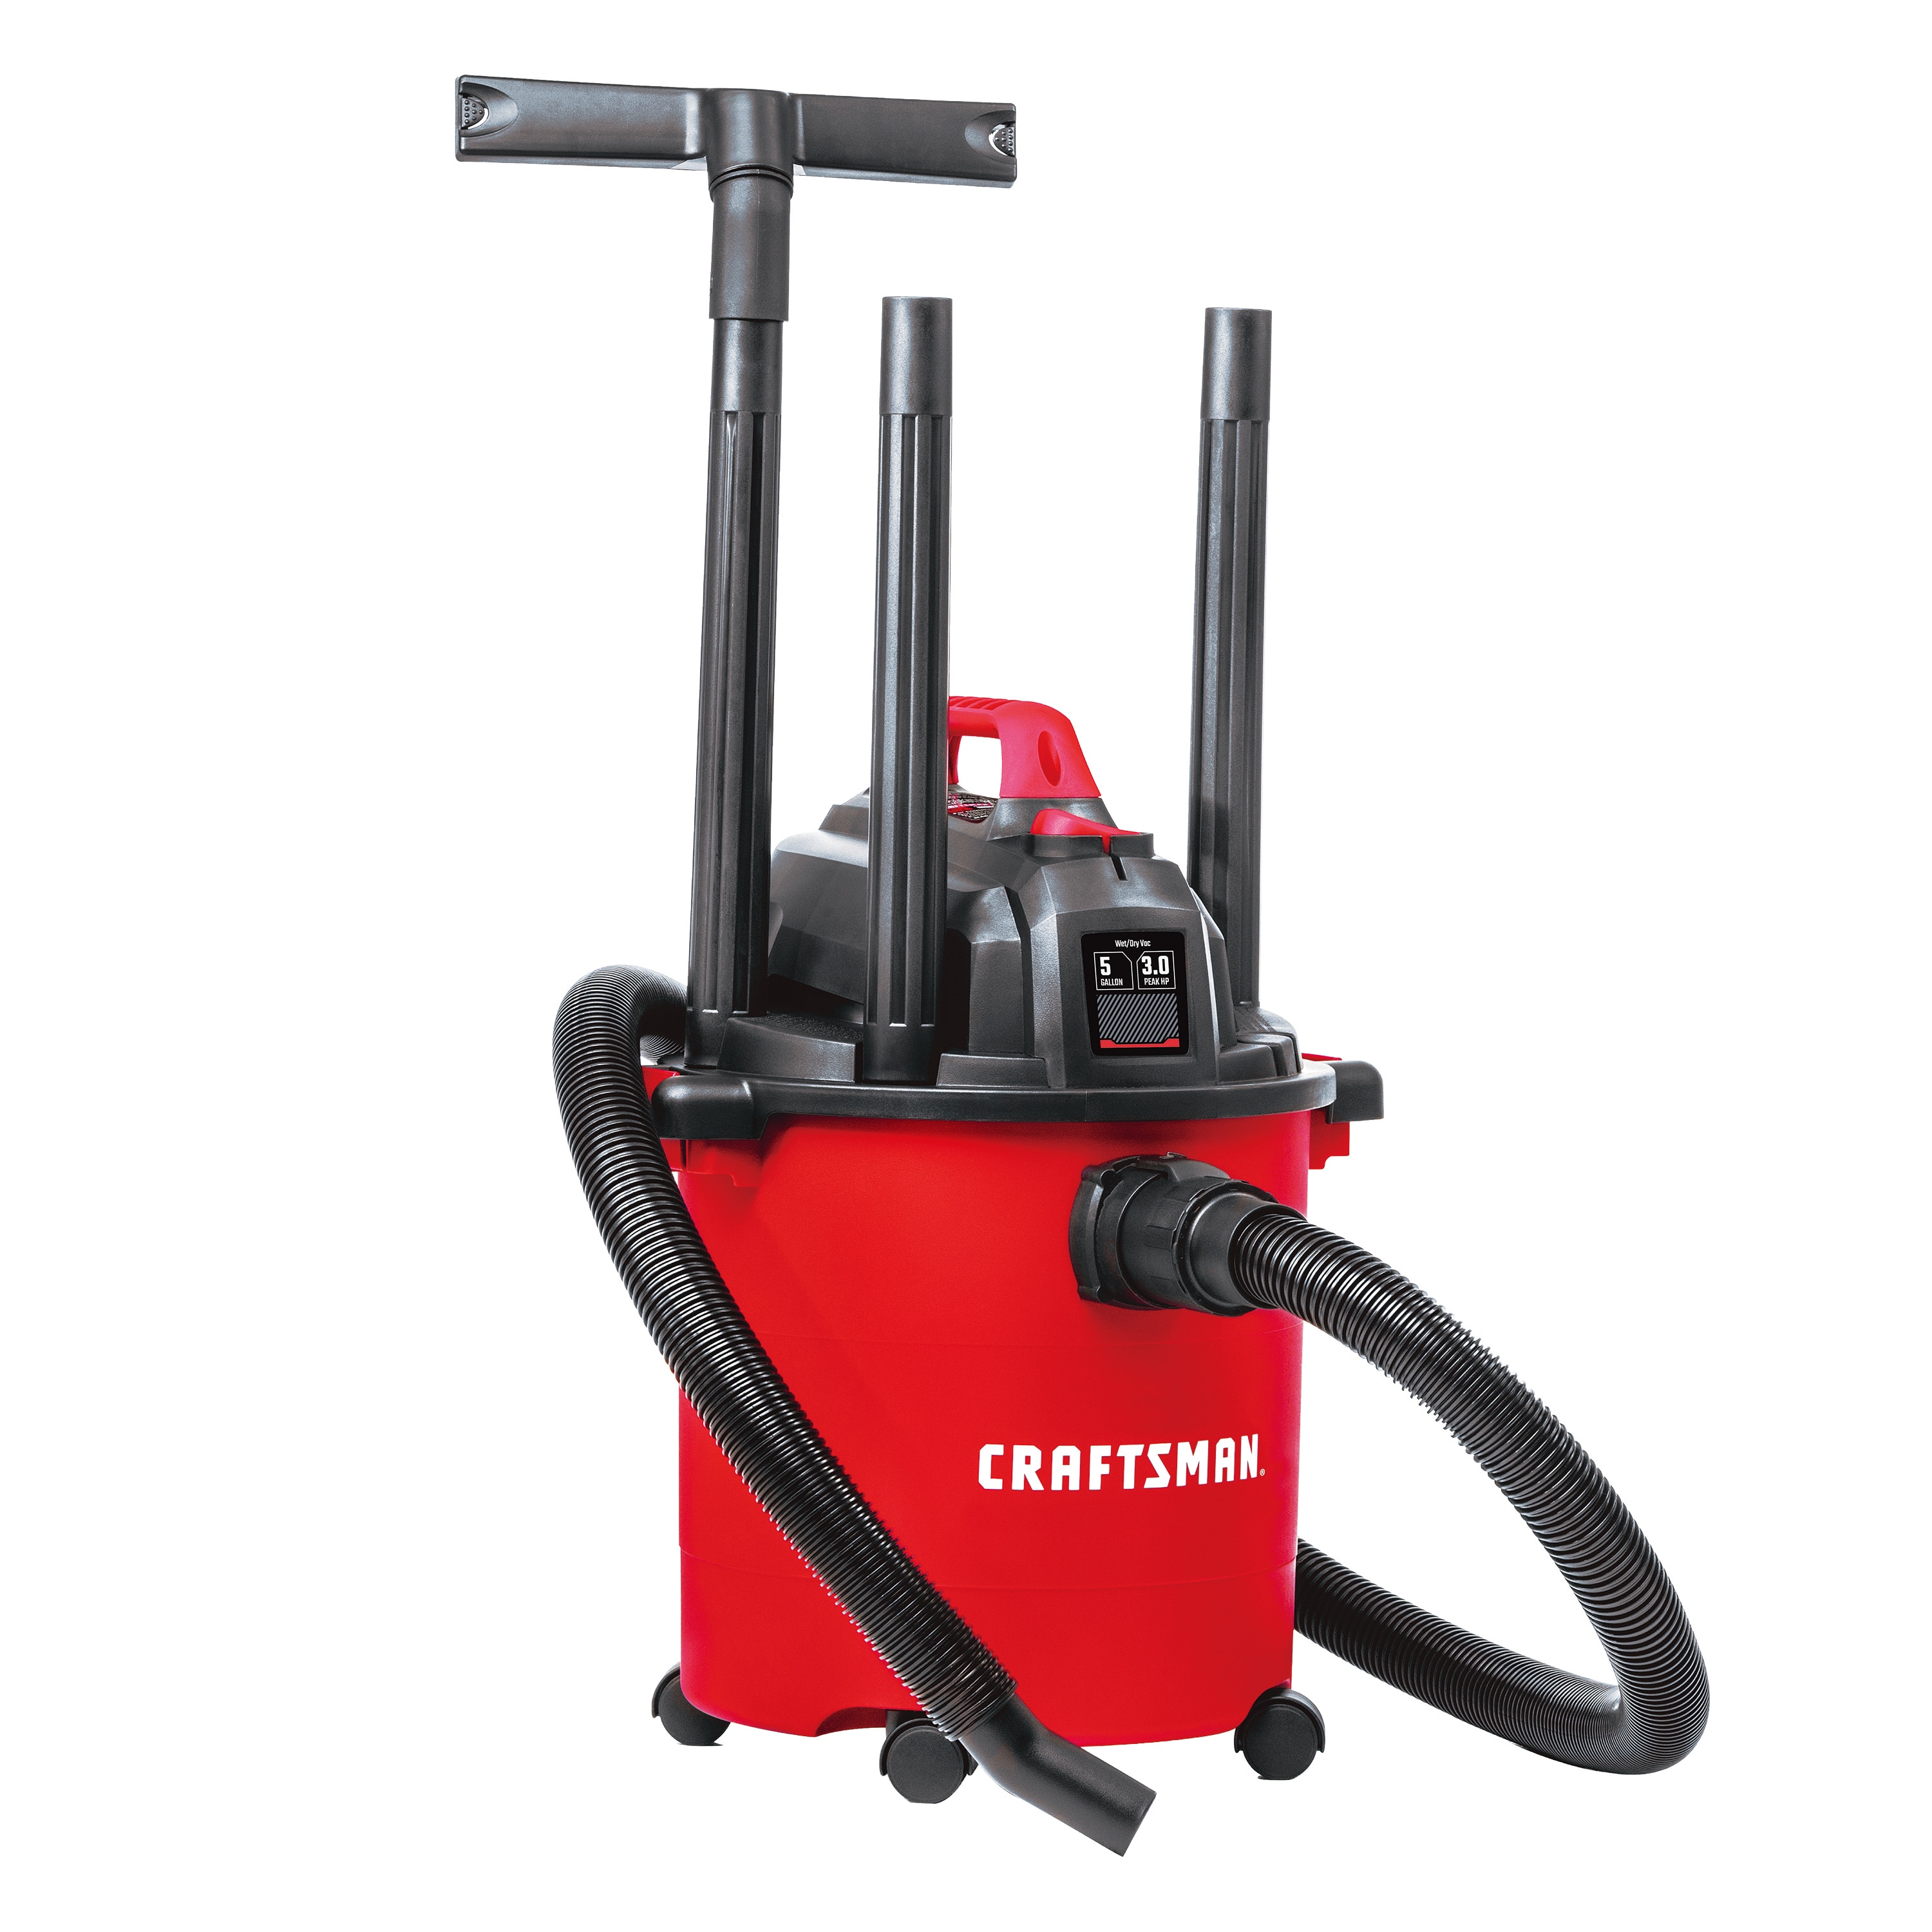 Michael's Equipment :: Products :: Canister Vacuums - Wet/Dry